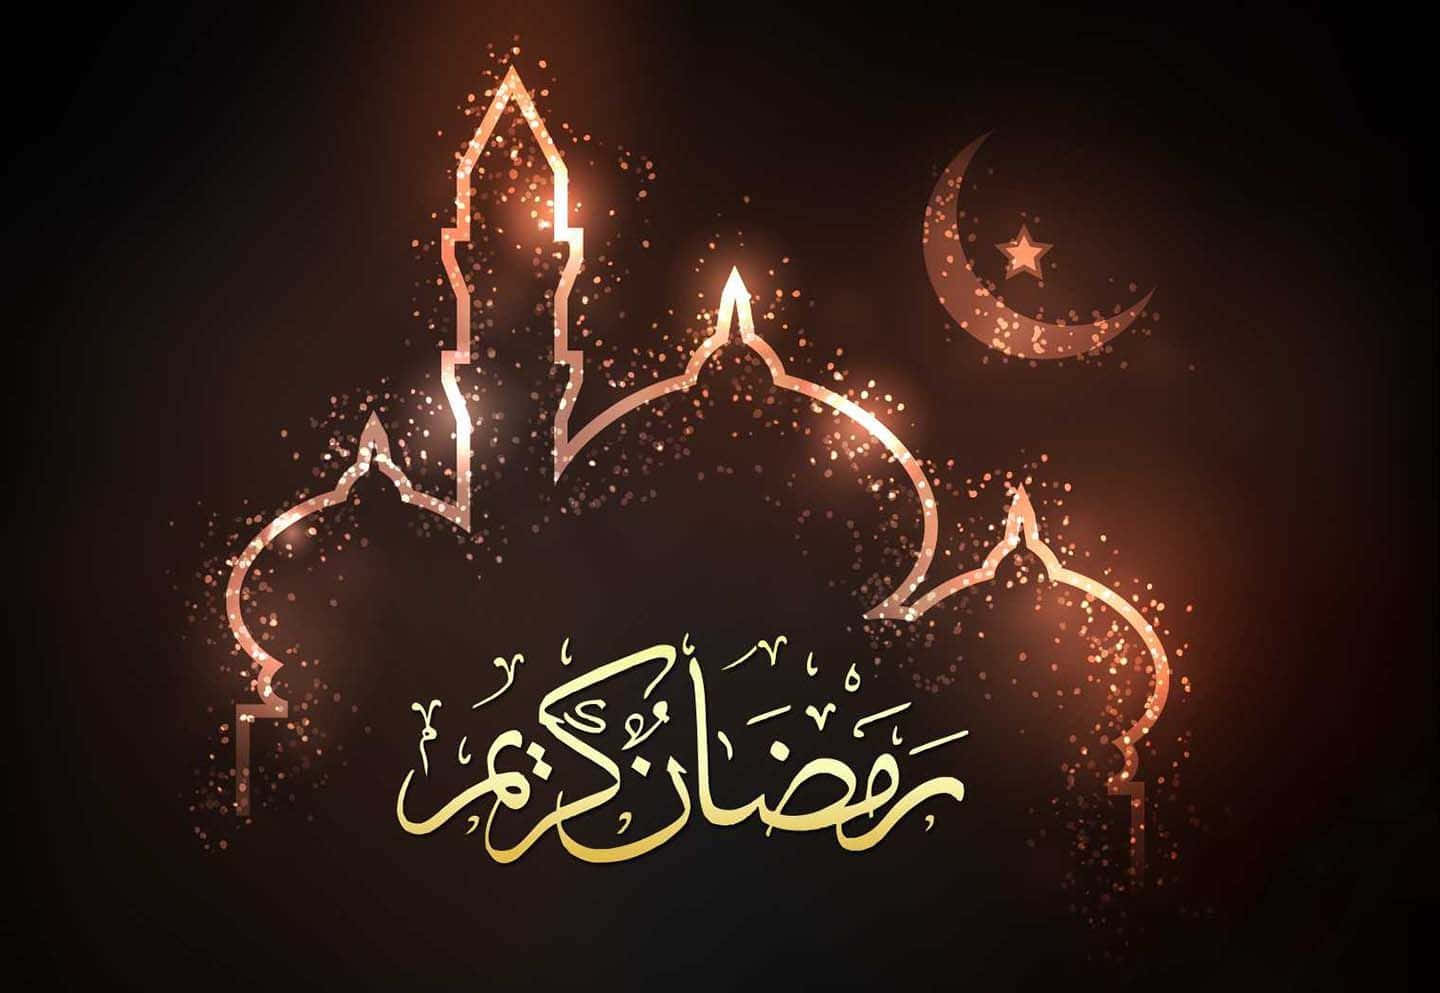 Celebrate Ramadan in the spirit of faith, family and reflection